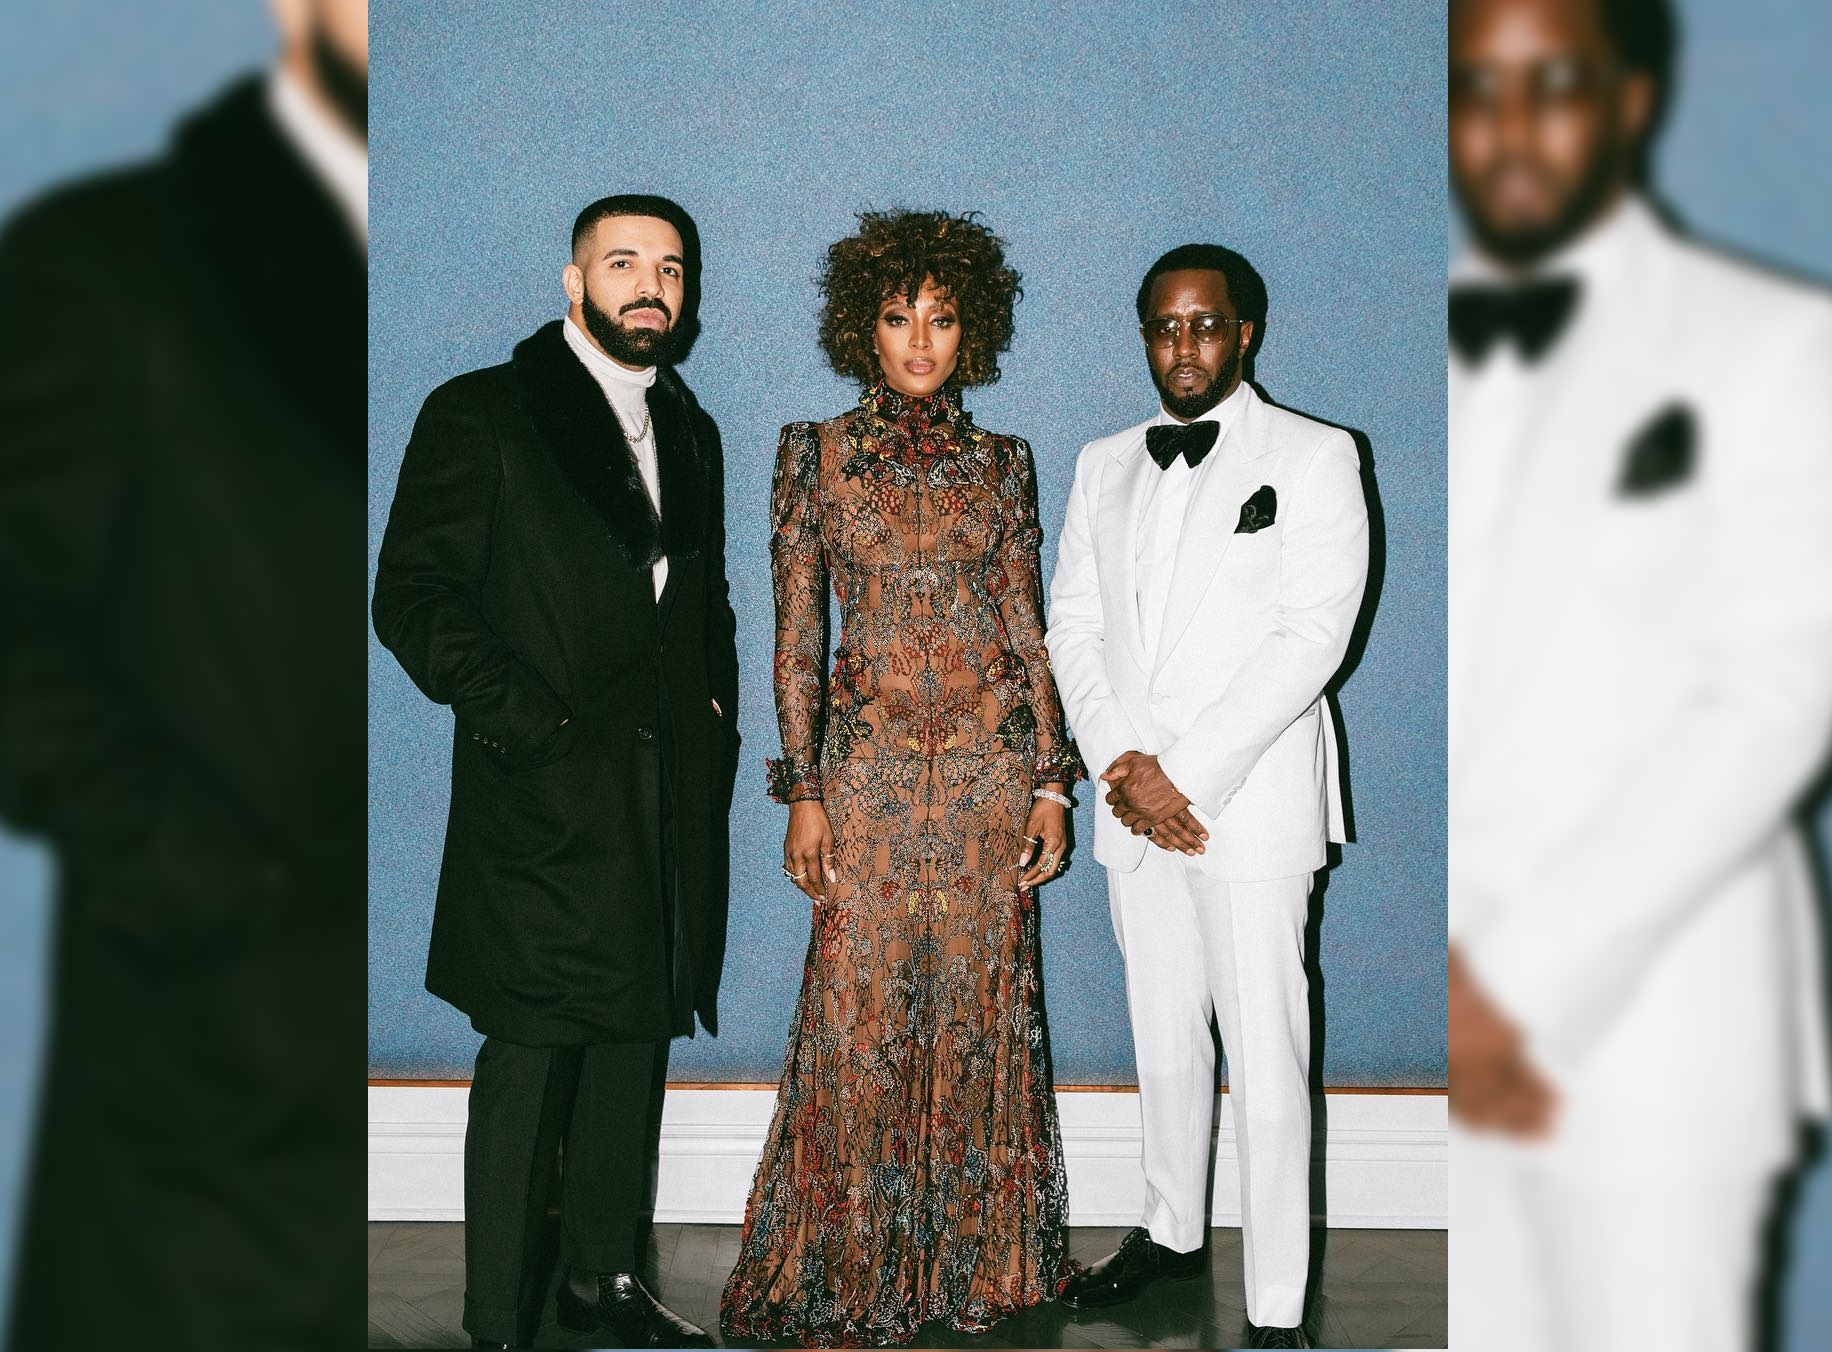 SPOTTED: Diddy, Naomi and Drake Go Formal For Oscars